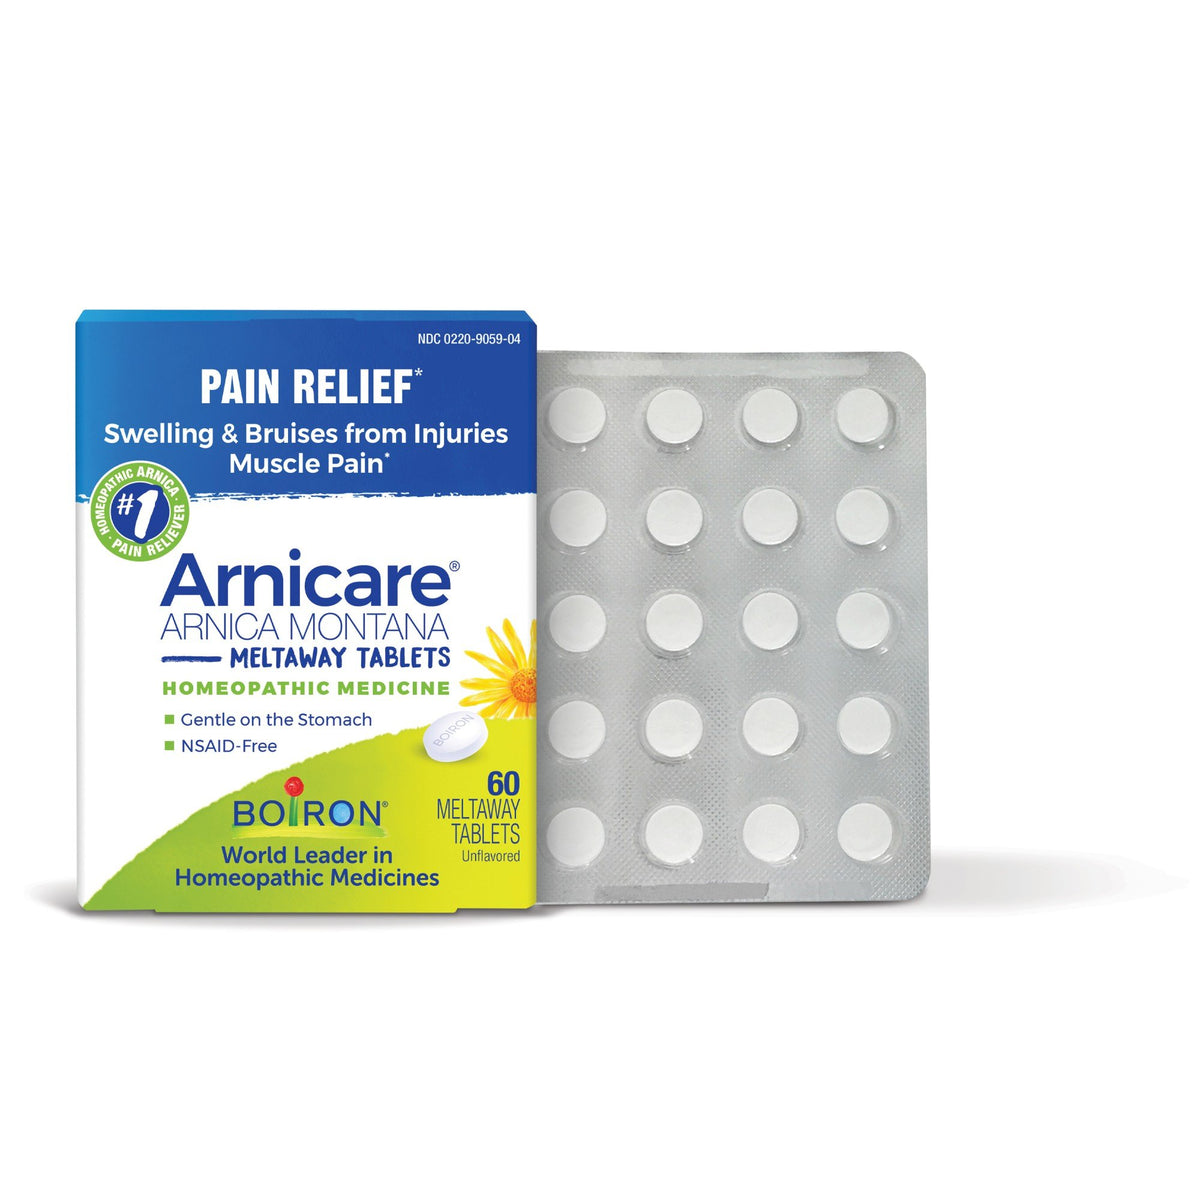 Boiron Arnicare Homeopathic Medicine For Pain Relief 60 Tablet